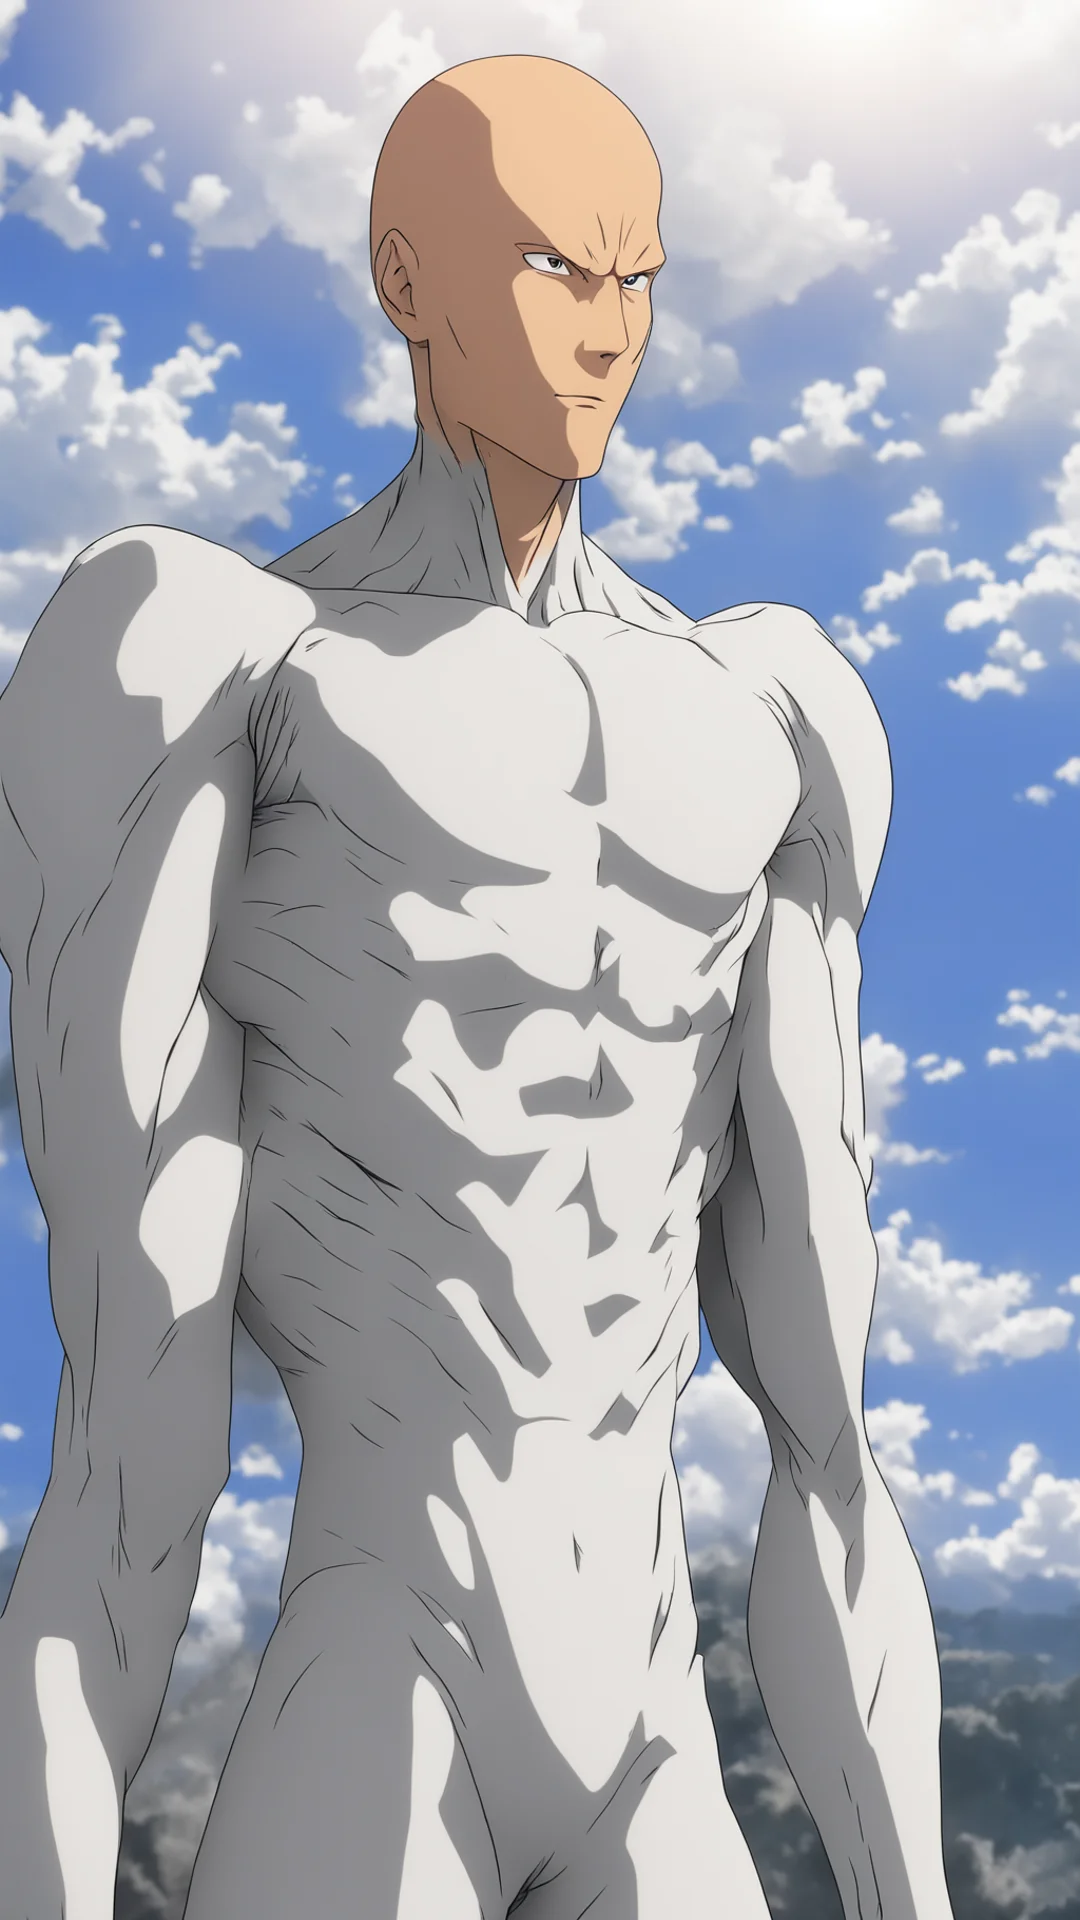 saitama one punch man standing victorious after destroying the earth amazing awesome portrait 2 tall